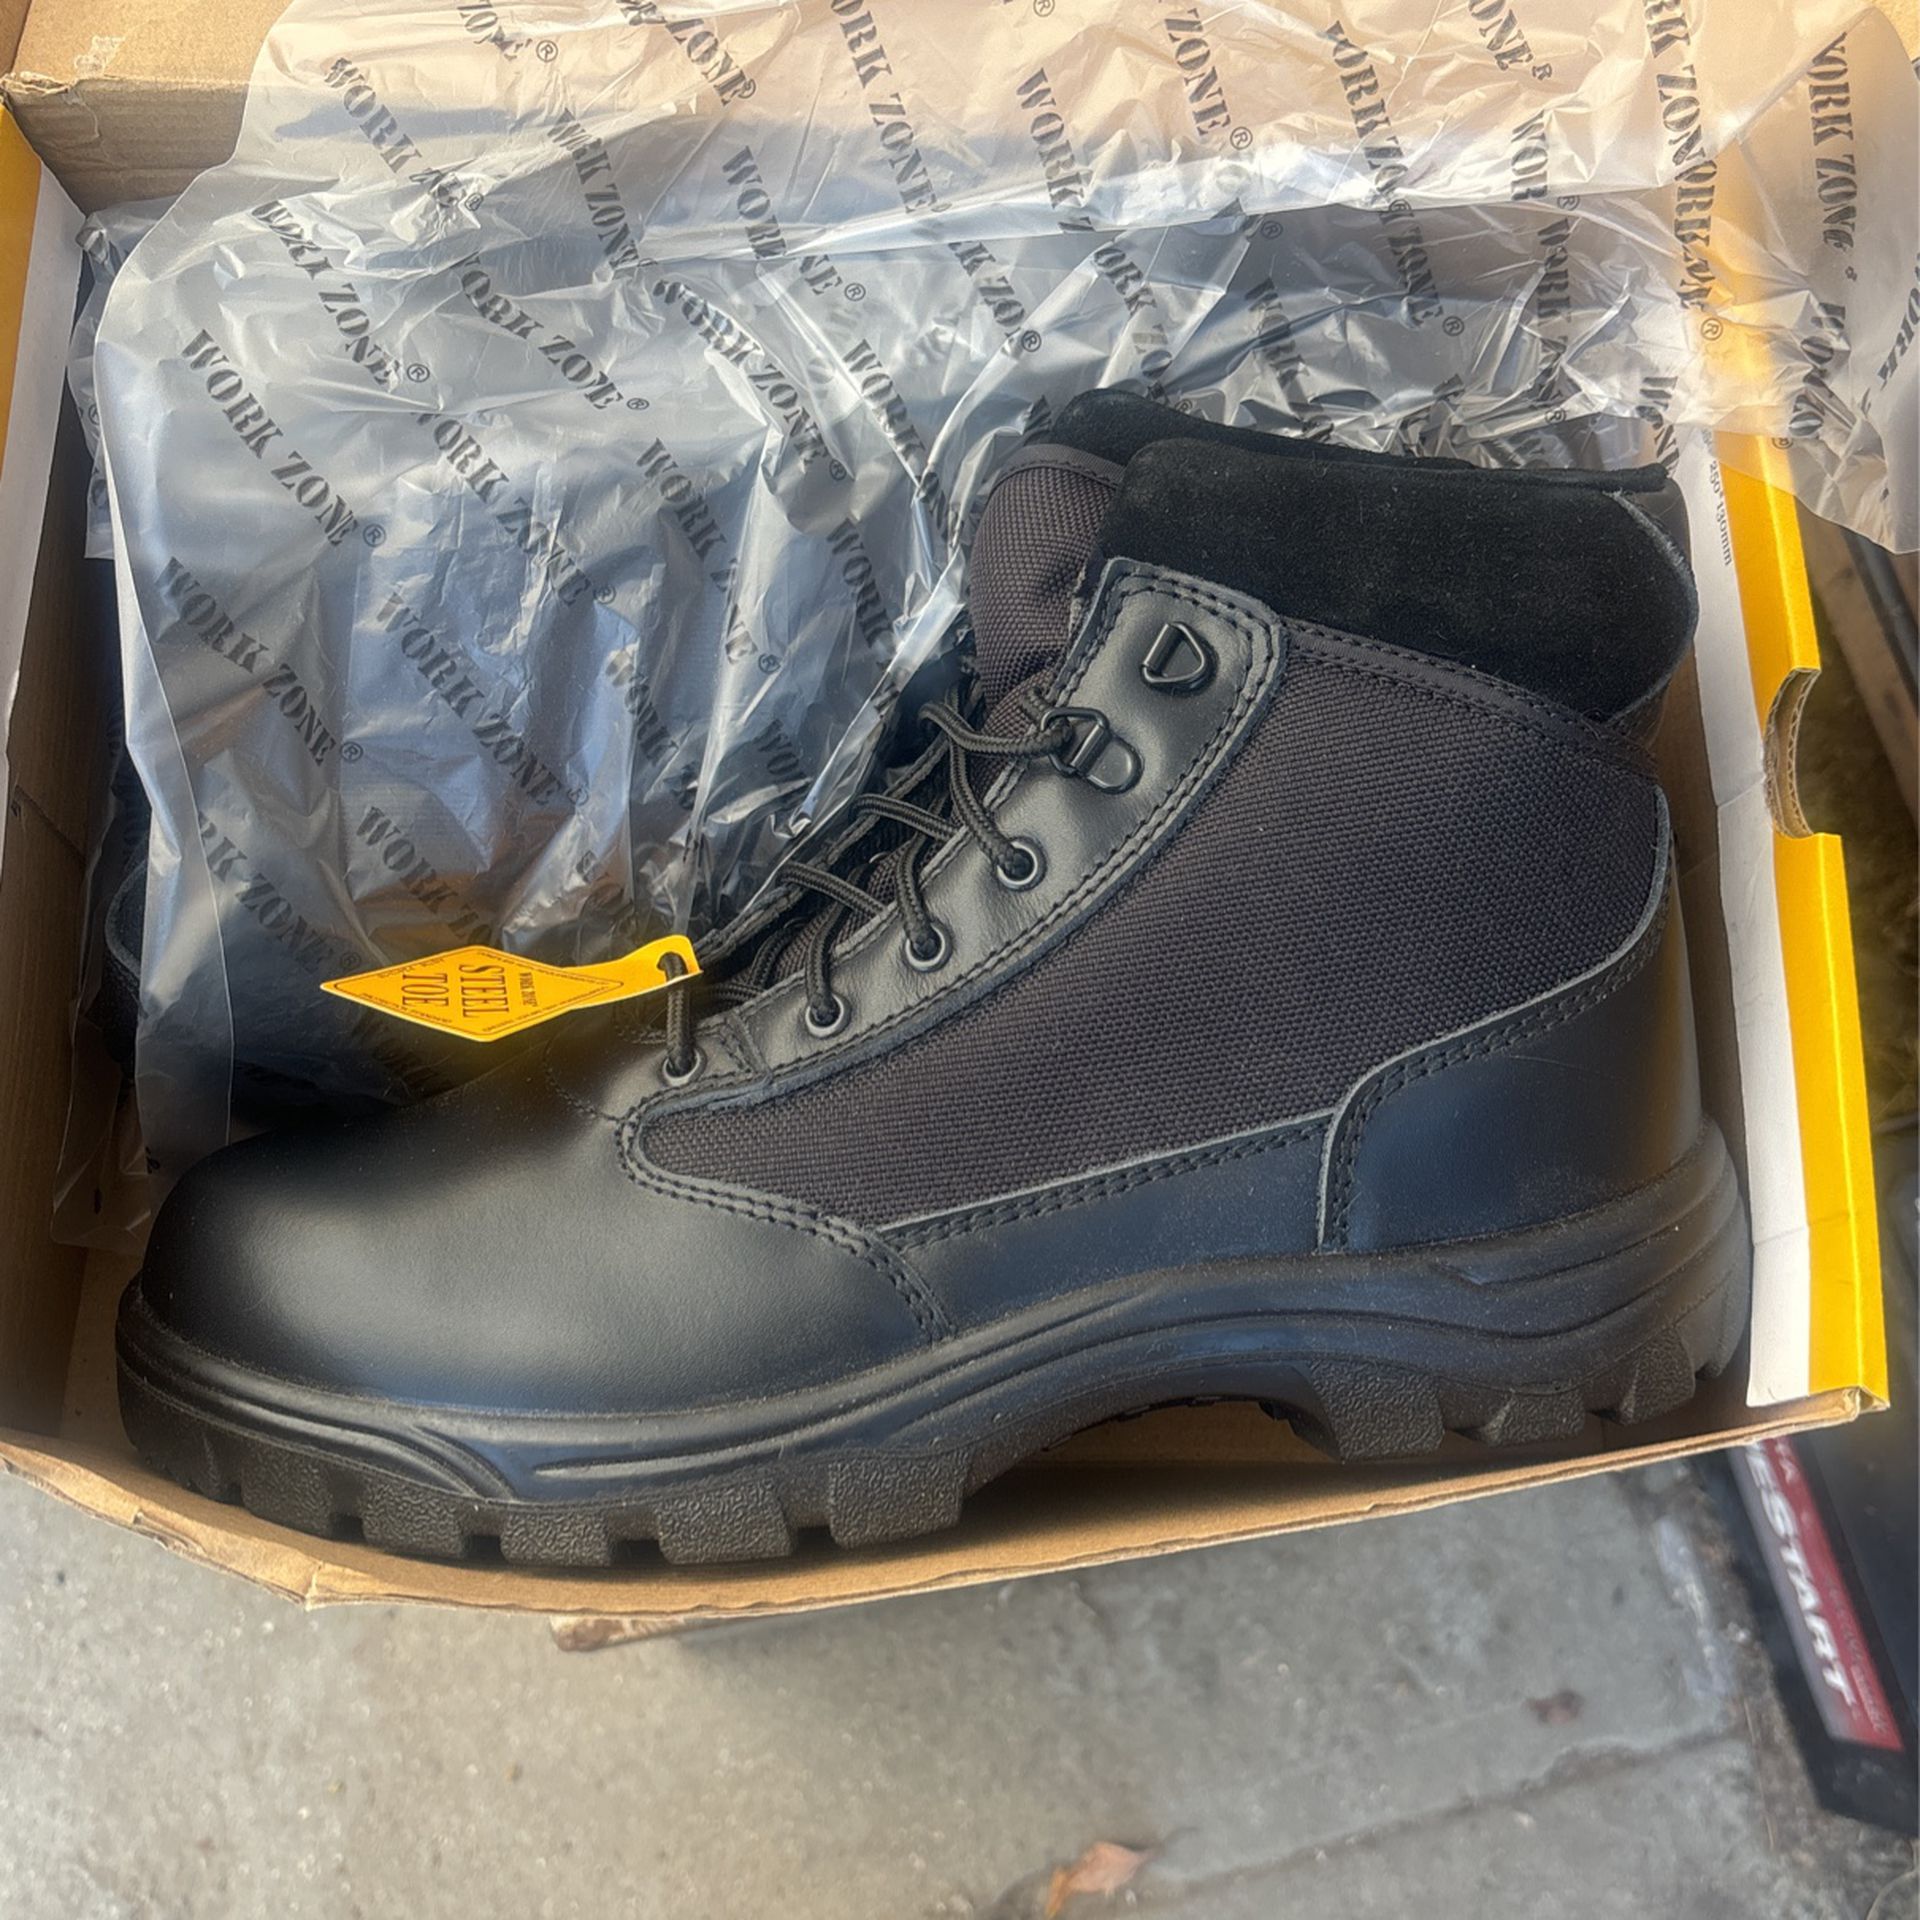 Work Zone Boots 